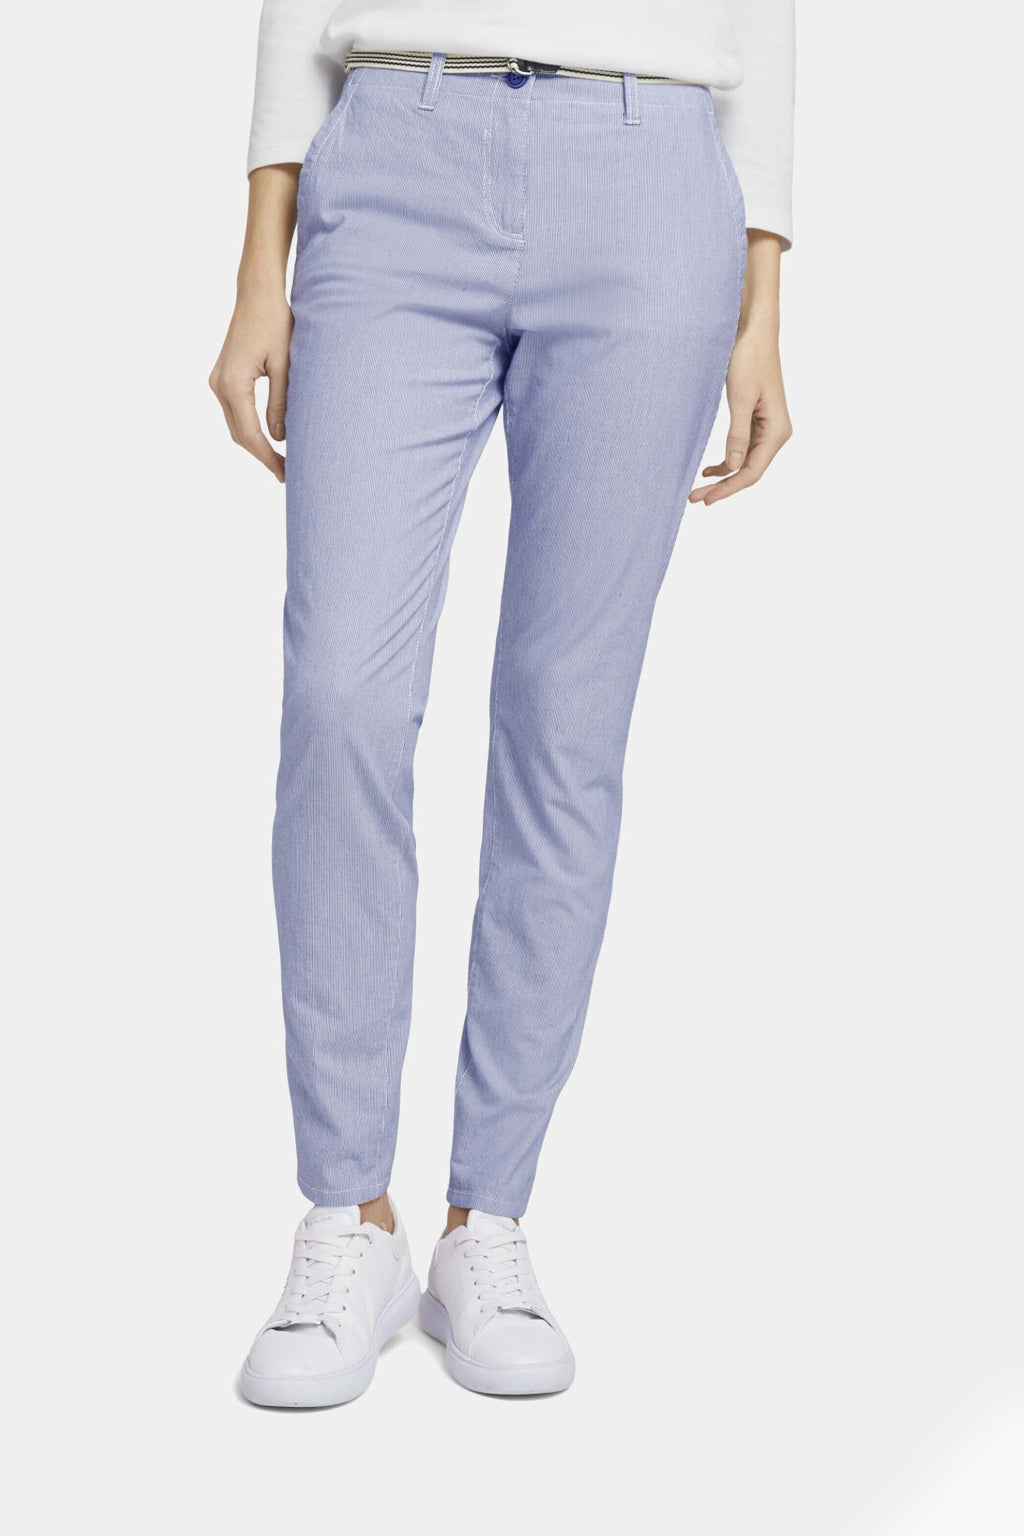 Tom Tailor - Chino Trousers With Fabric Belt, Organic Cotton